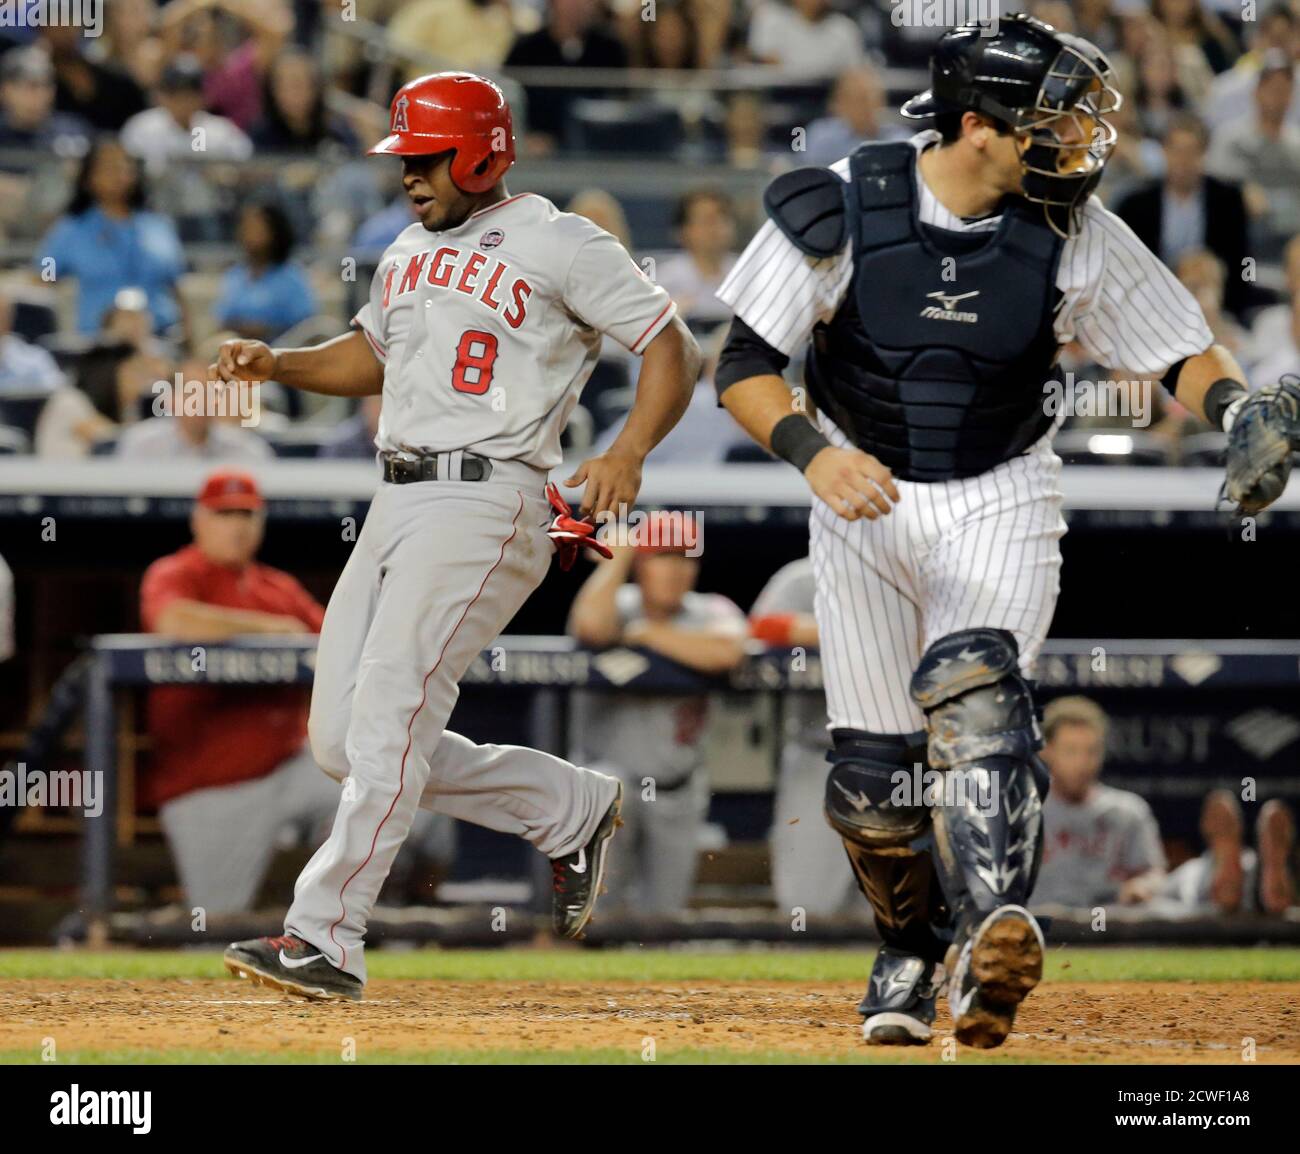 Los Angeles Angels runner Chris Nelson attempts to score past New York Yankees catcher Austin Romine (R) after tagging up at third base on a fly ball out in the sixth inning of their MLB American League game at Yankee Stadium in New York, August 13, 2013. Nelson was ruled out in a double play because he left third base early, ending the inning with no score. REUTERS/Ray Stubblebine (UNITED STATES - Tags: SPORT BASEBALL) Stock Photo